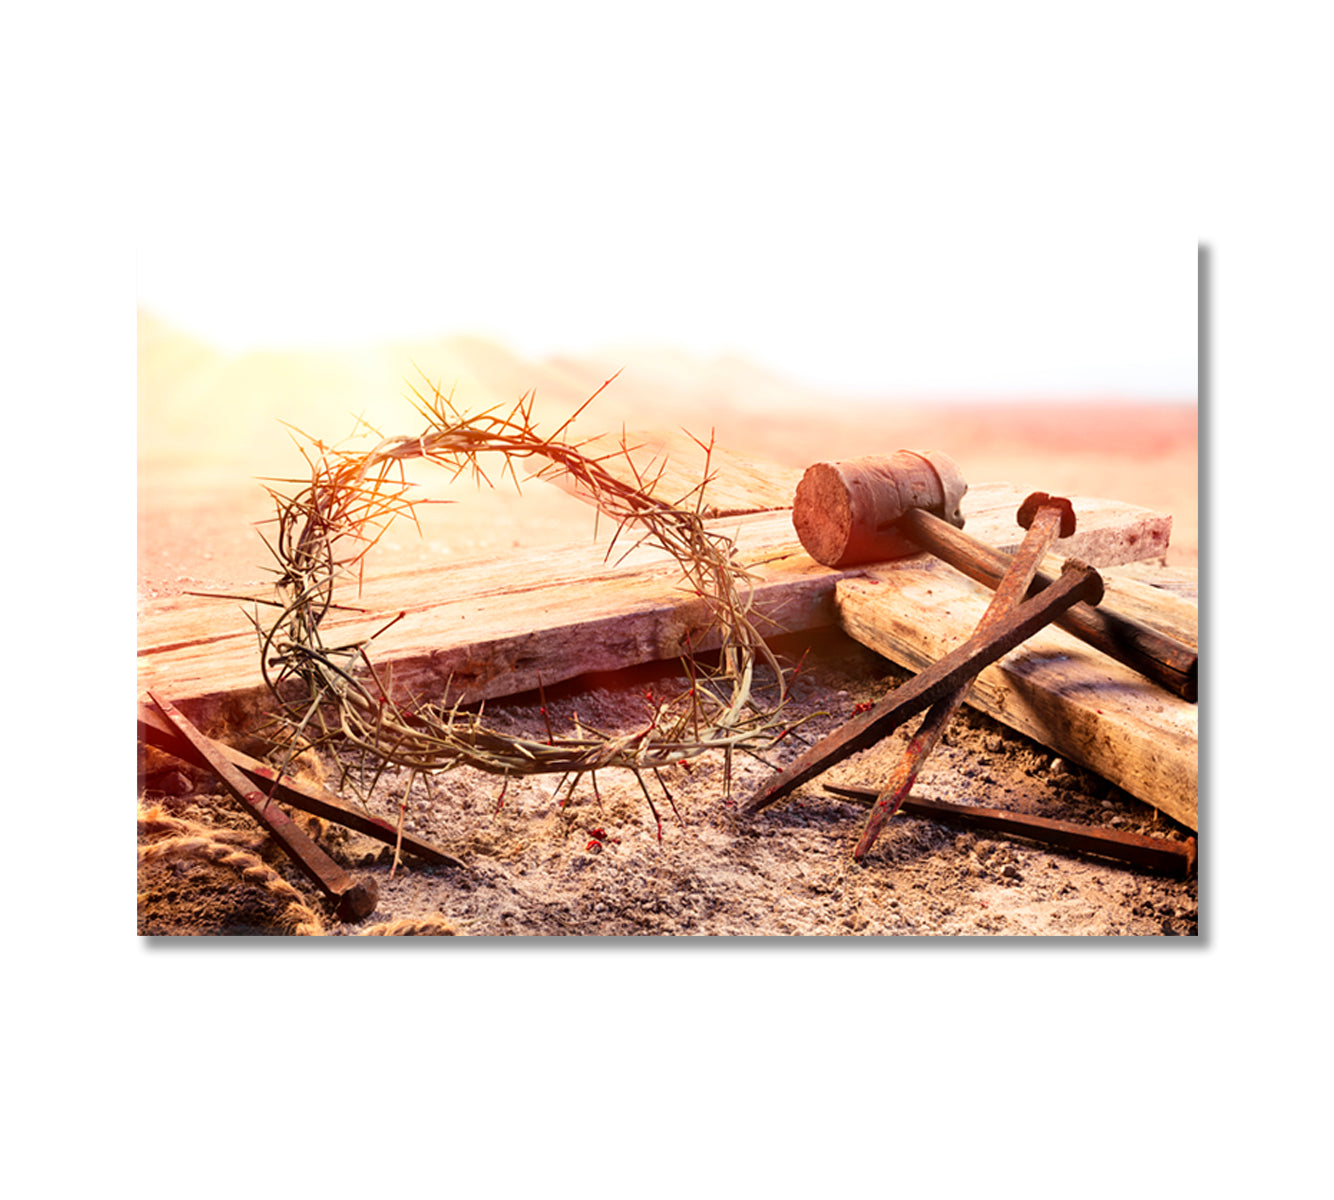 Crucifixion Cross With Crown Of Thorns Canvas Print-Canvas Print-CetArt-1 Panel-24x16 inches-CetArt